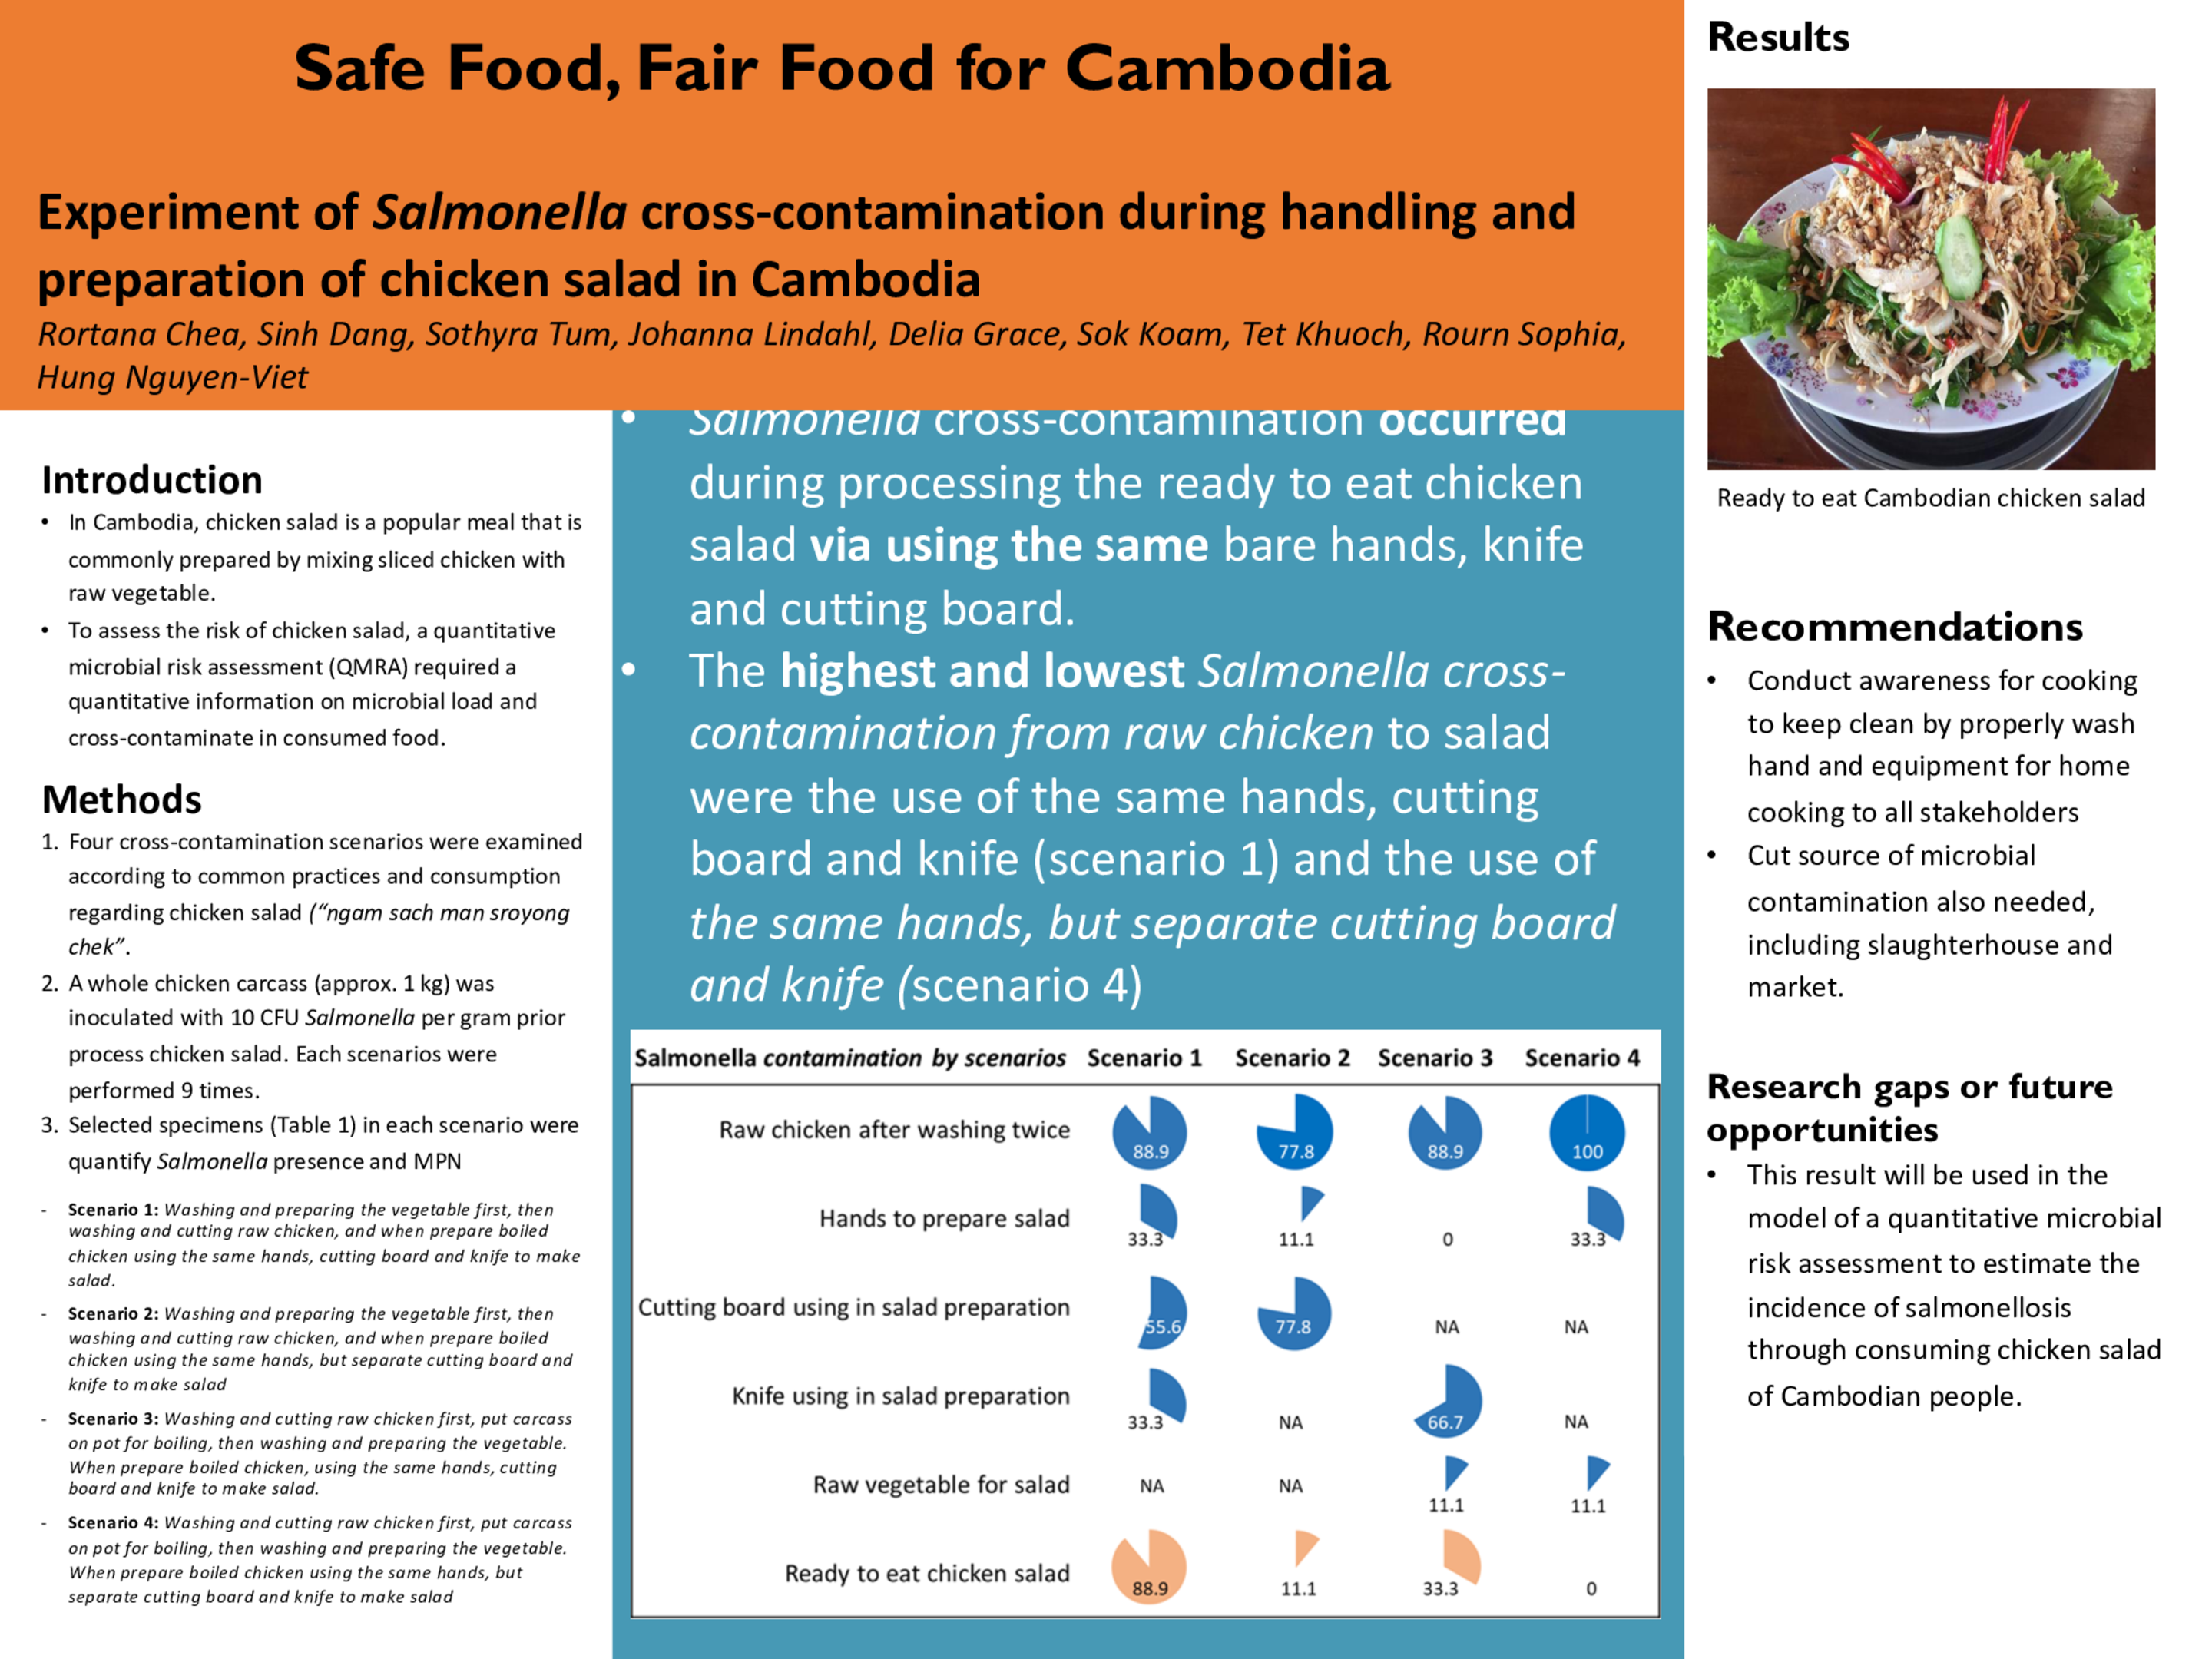 Safe Food, Fair Food for Cambodia - Experiment of Salmonella cross-contamination during handling and preparation of chicken salad in Cambodia